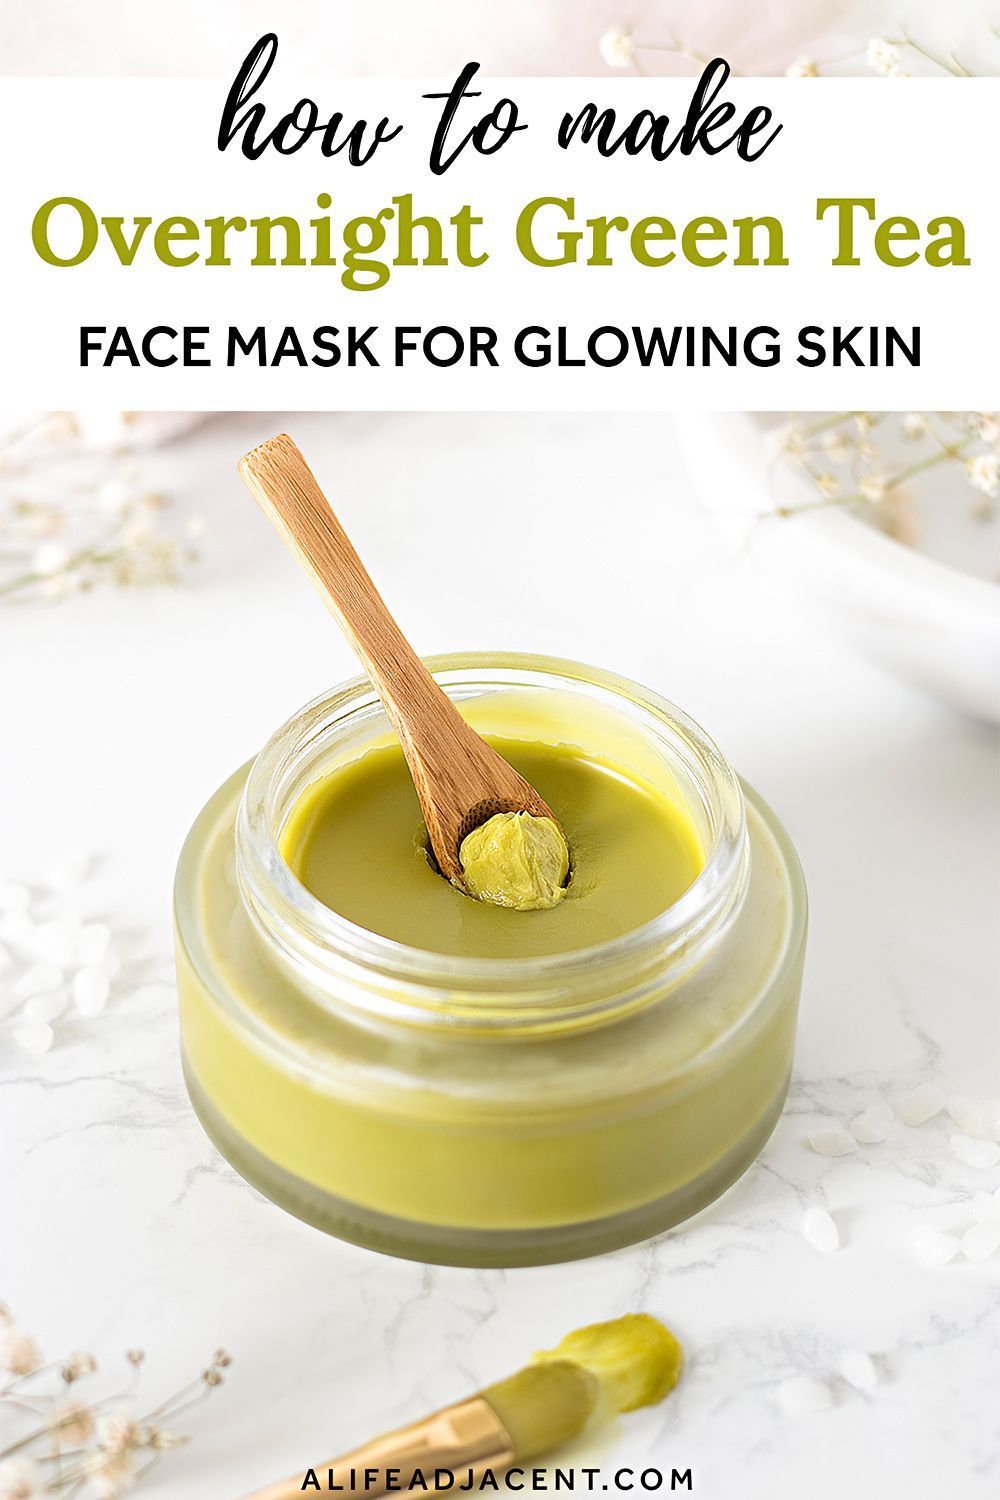 DIY Green Tea Overnight Face Mask for Glowing Skin - DIY Green Tea Overnight Face Mask for Glowing Skin -   18 diy Face Mask natural ideas